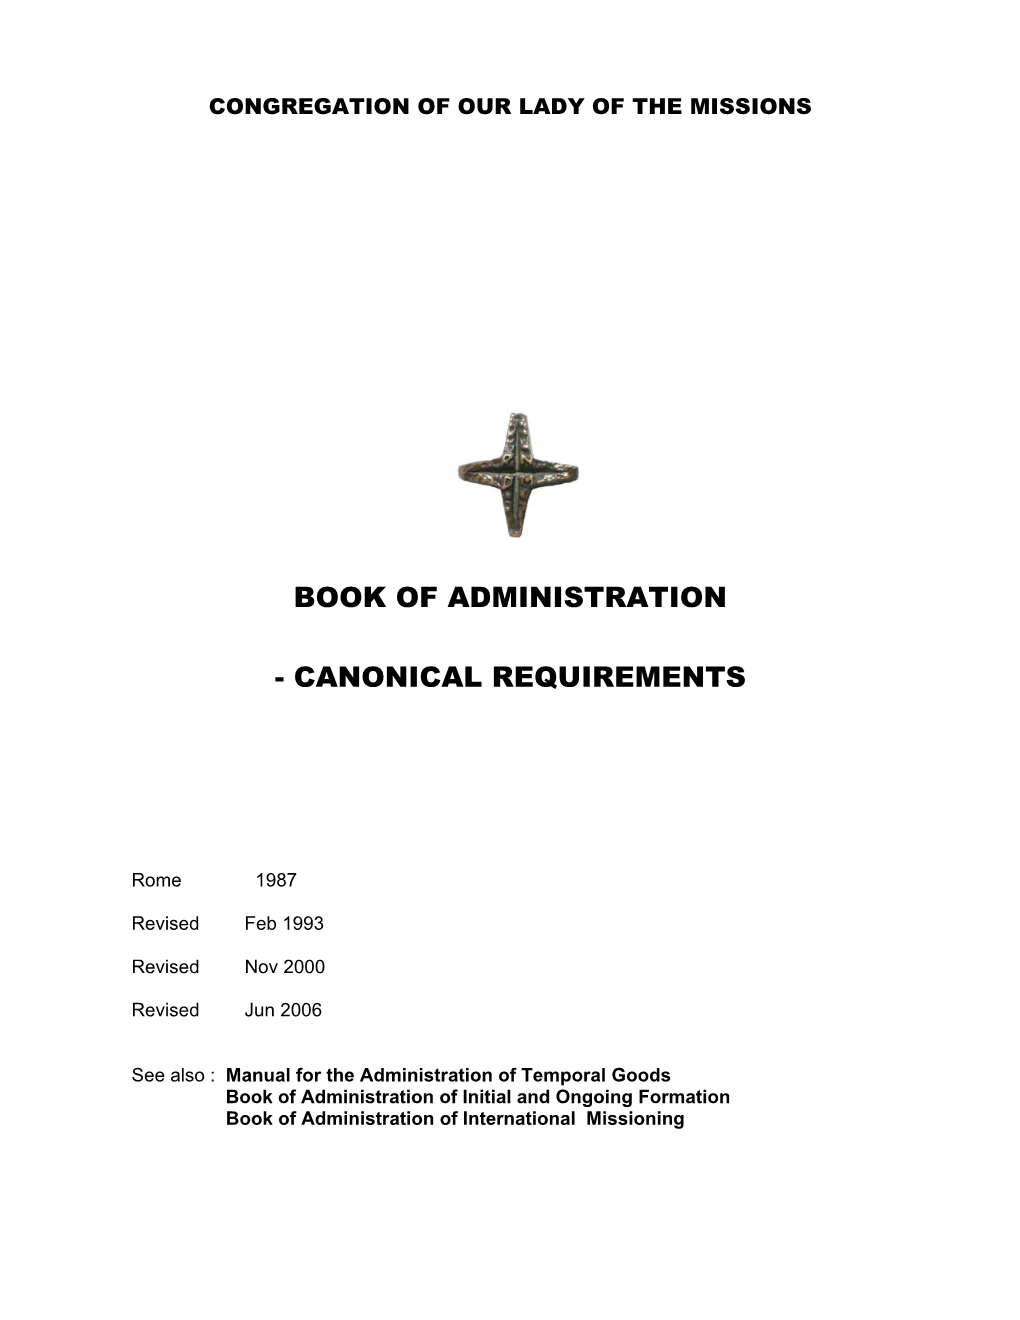 Canonical Requirements